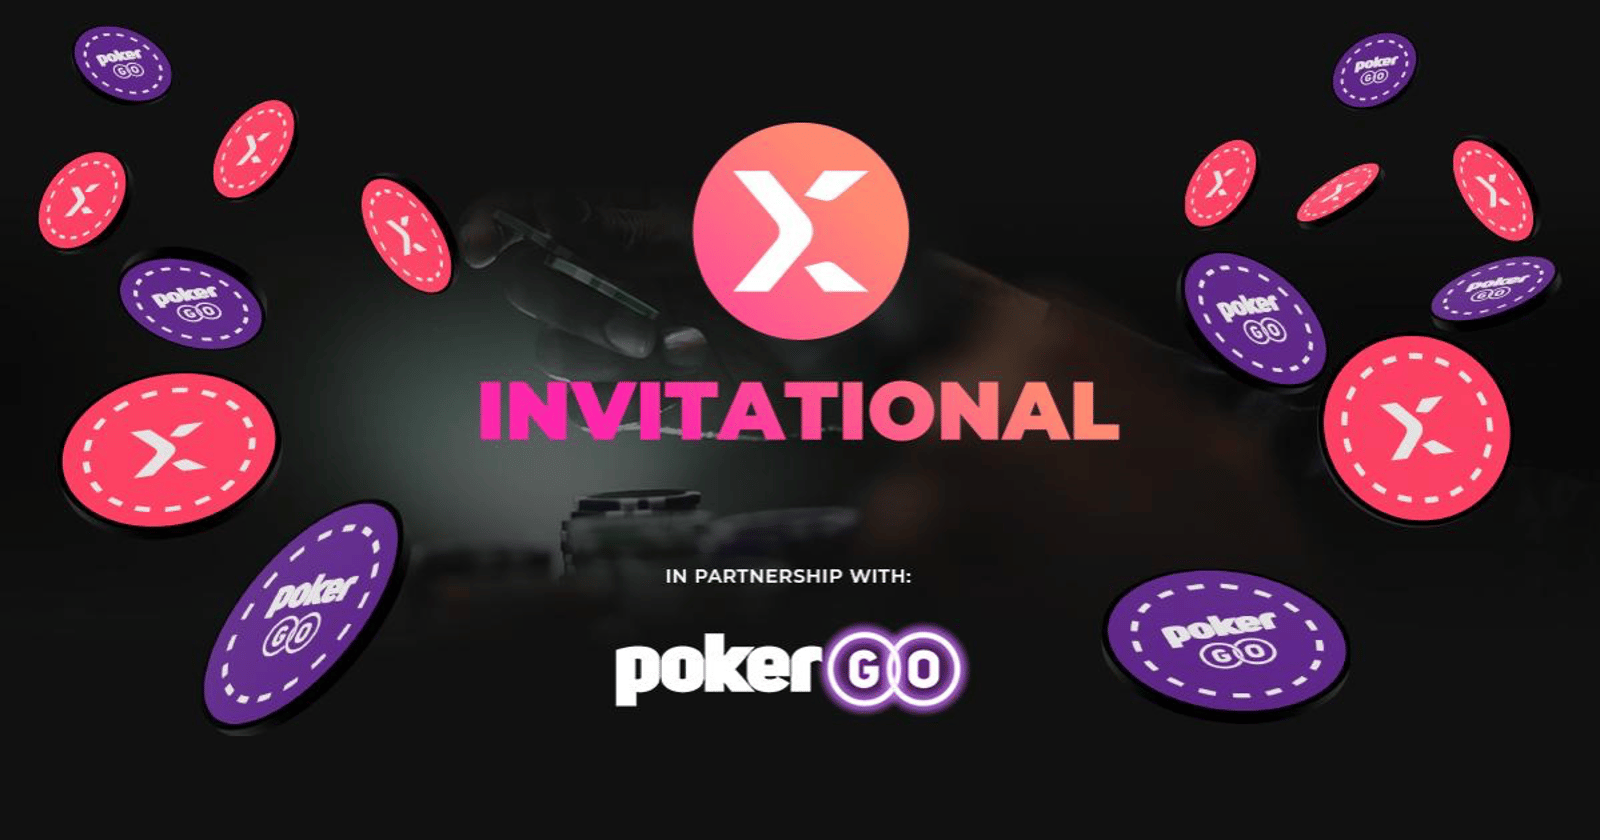 StormX To Hold Its First Invitational Poker Tournament at the PokerGO® Studio in Las Vegas